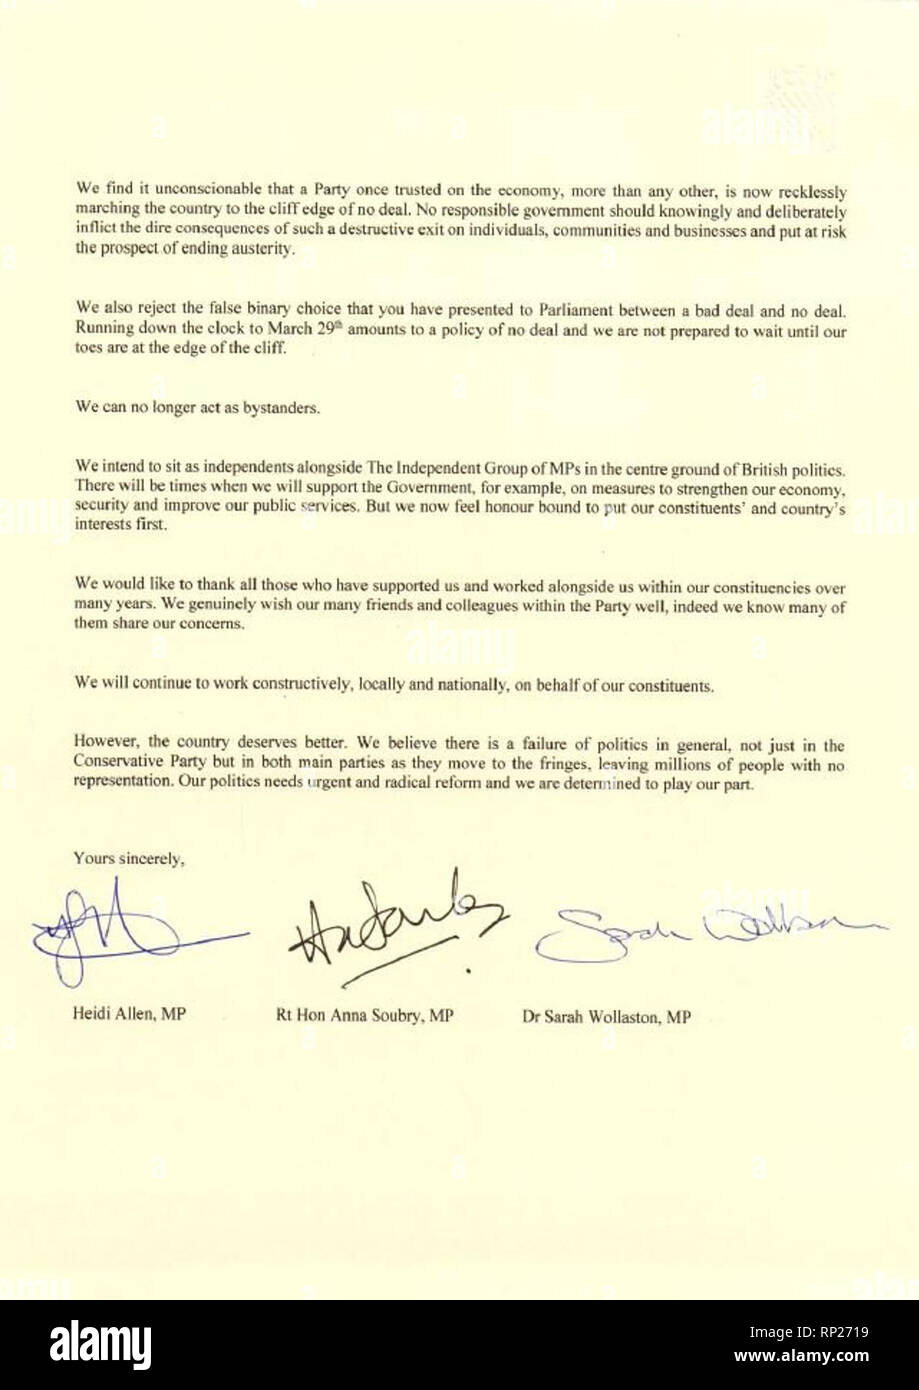 Page 1/2. The letter to the Prime Minister, written and signed by MPs Heidi Allen, Anna Soubry and Sarah Wollaston, who have resigned from the Conservative Party and joined the Independent Group. Stock Photo